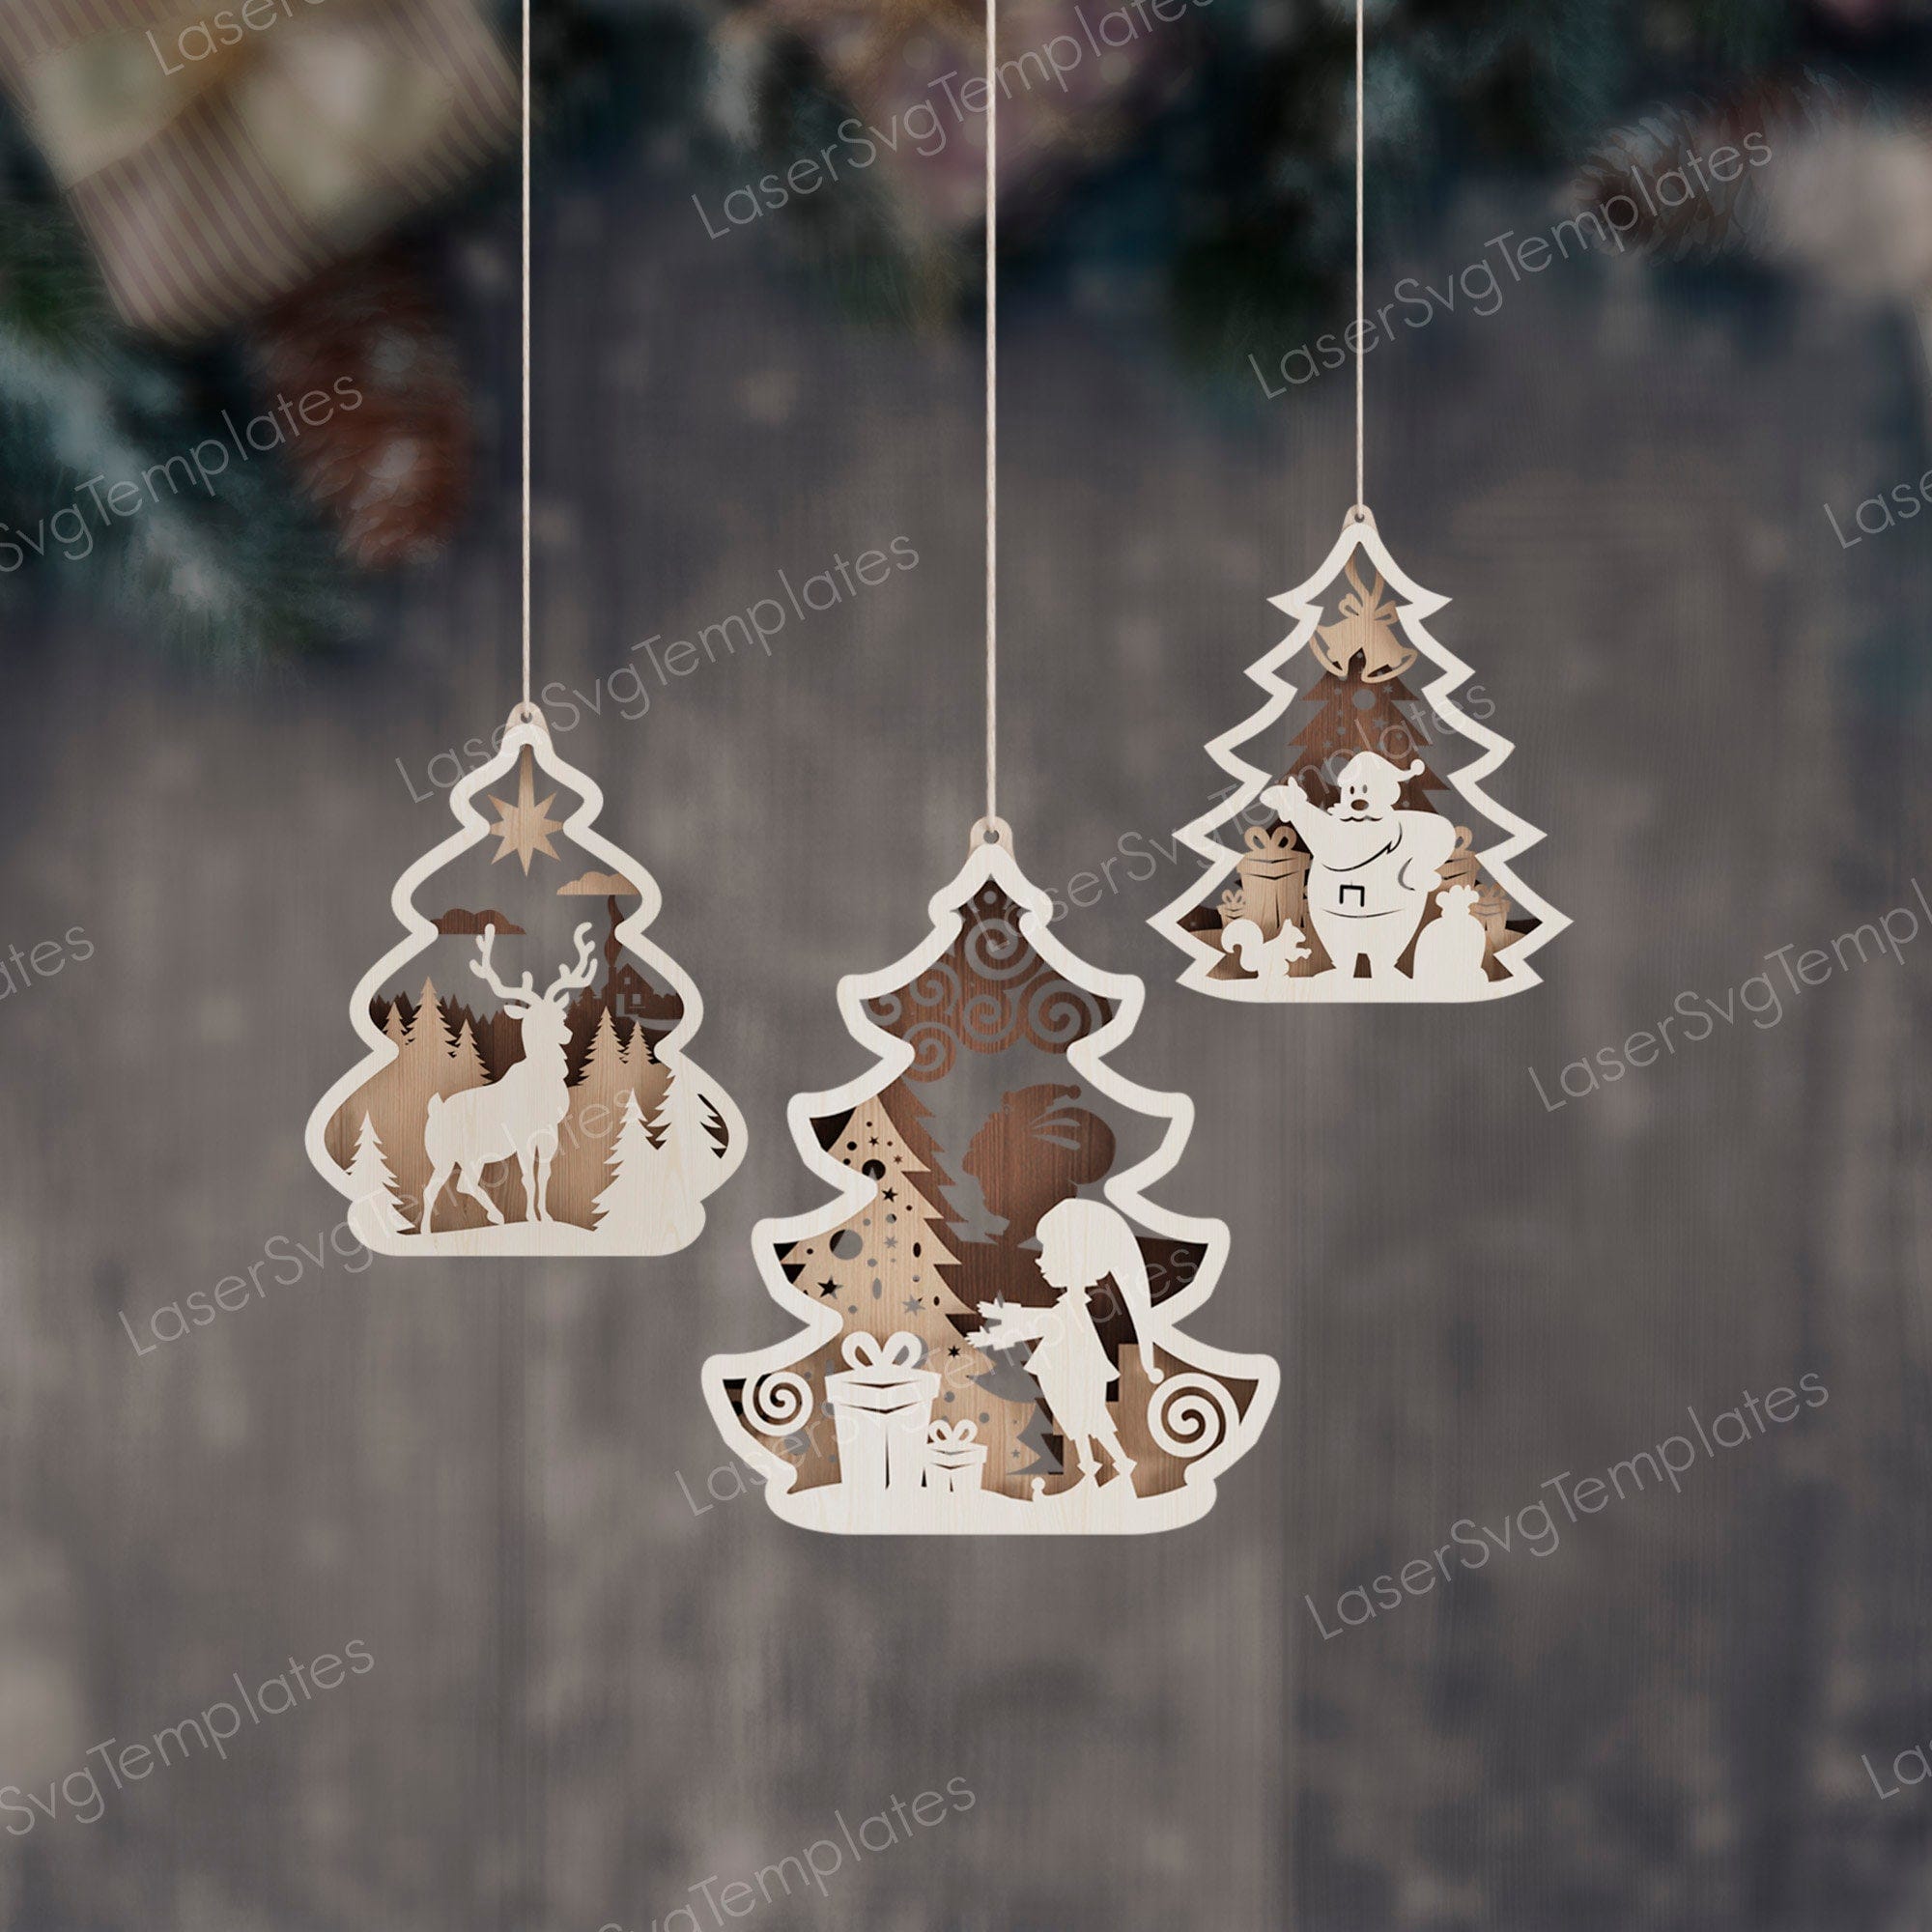 Multilayer Christmas tree ball ornaments svg laser cut file Glowforge Christmas bauble ornament tree decor dxf Christmas vector cnc template